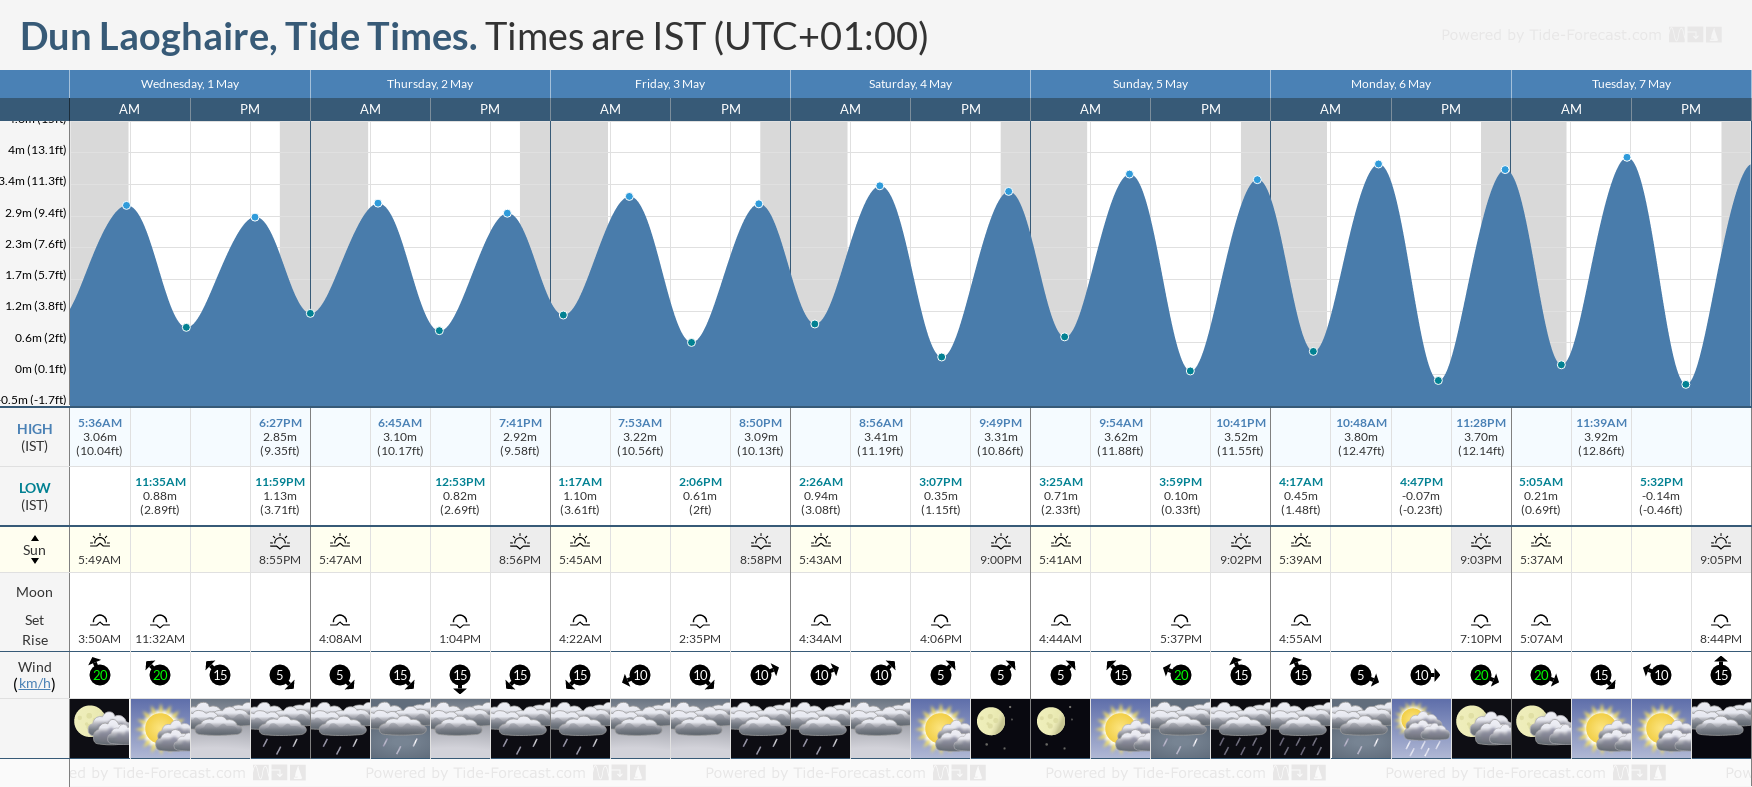 Dun Laoghaire Tide Chart including high and low tide times for the next 7 days